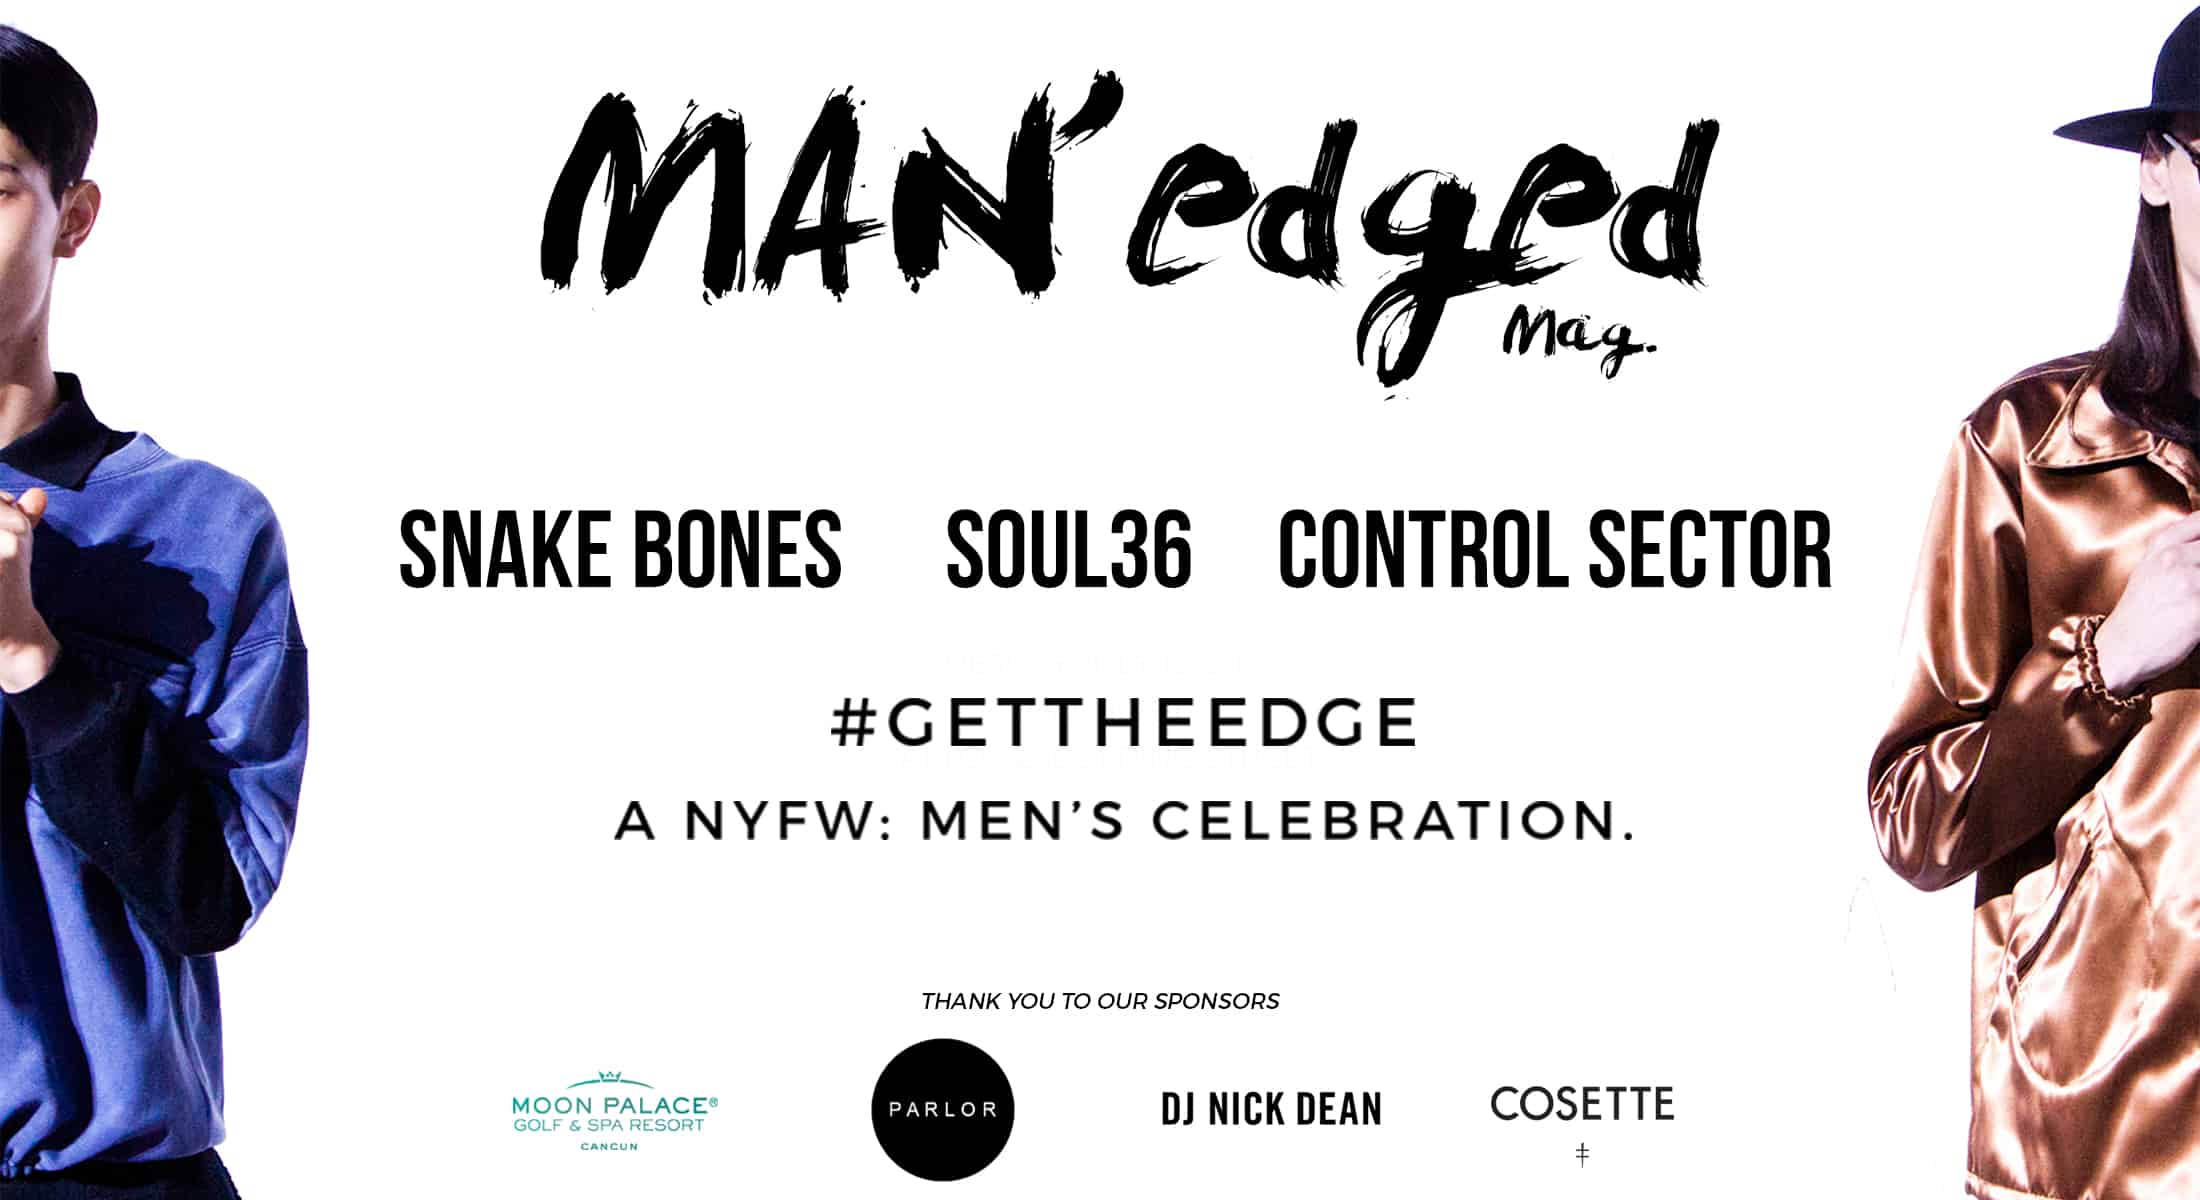 MAN'edged Magazine NYFWM Event New York Men's Fashion week (#NYFWM) is back and we're gearing up for an epic celebration. How? By hosting the hottest New York City men’s fashion event of the season. Invited guests will sip complimentary cocktails, network with high-profile